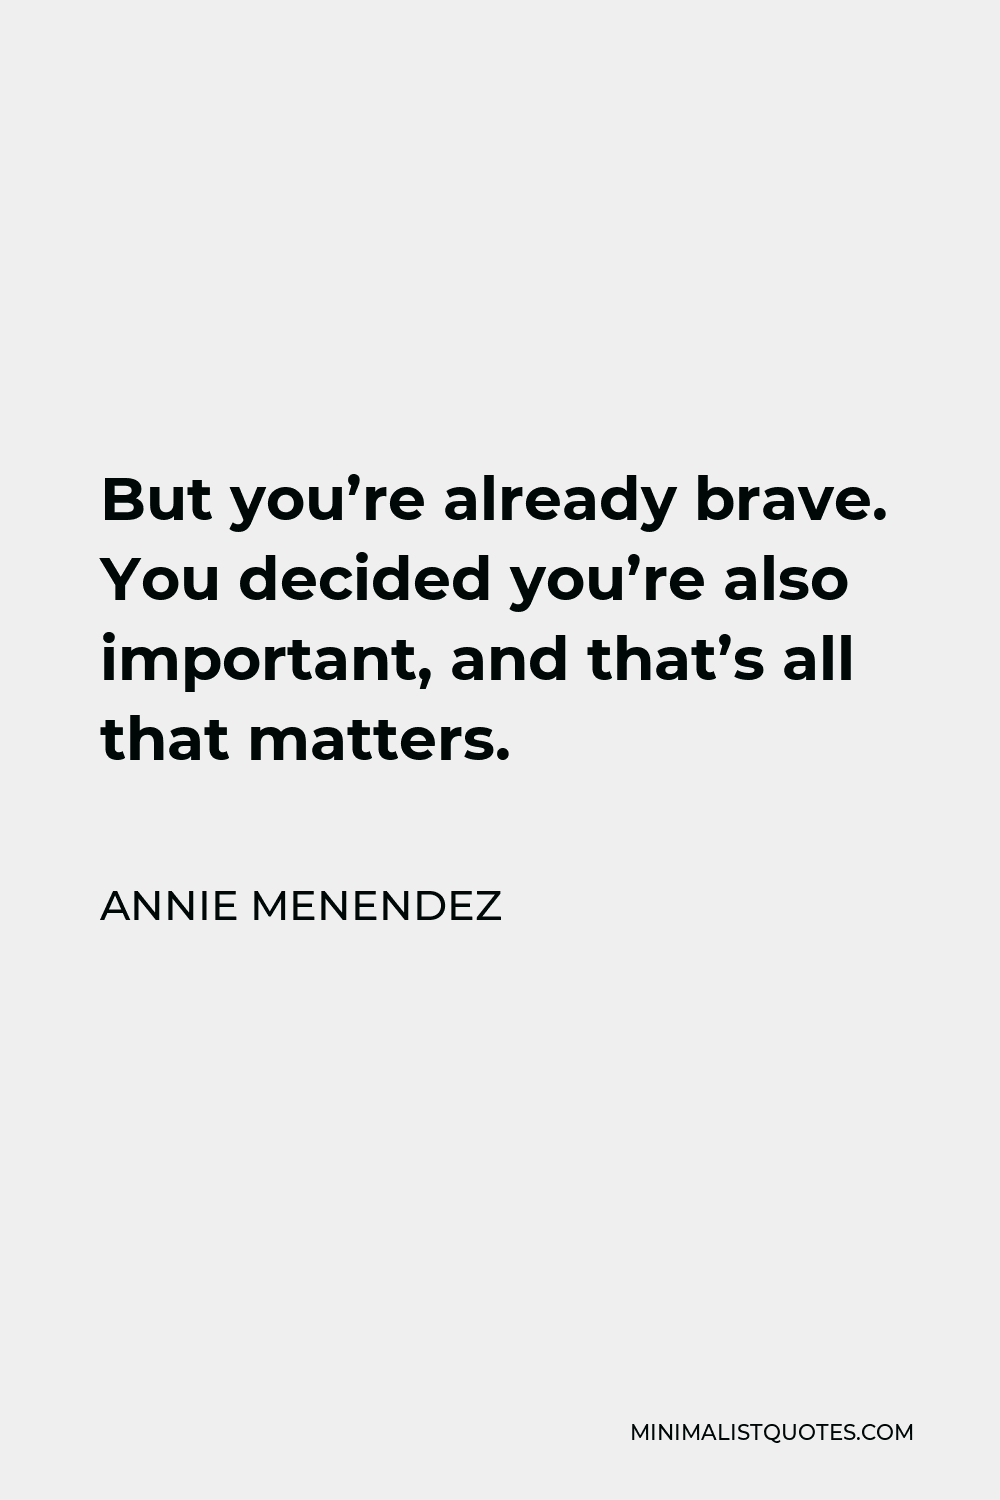 Annie Menendez Quote - But you’re already brave. You decided you’re also important, and that’s all that matters.